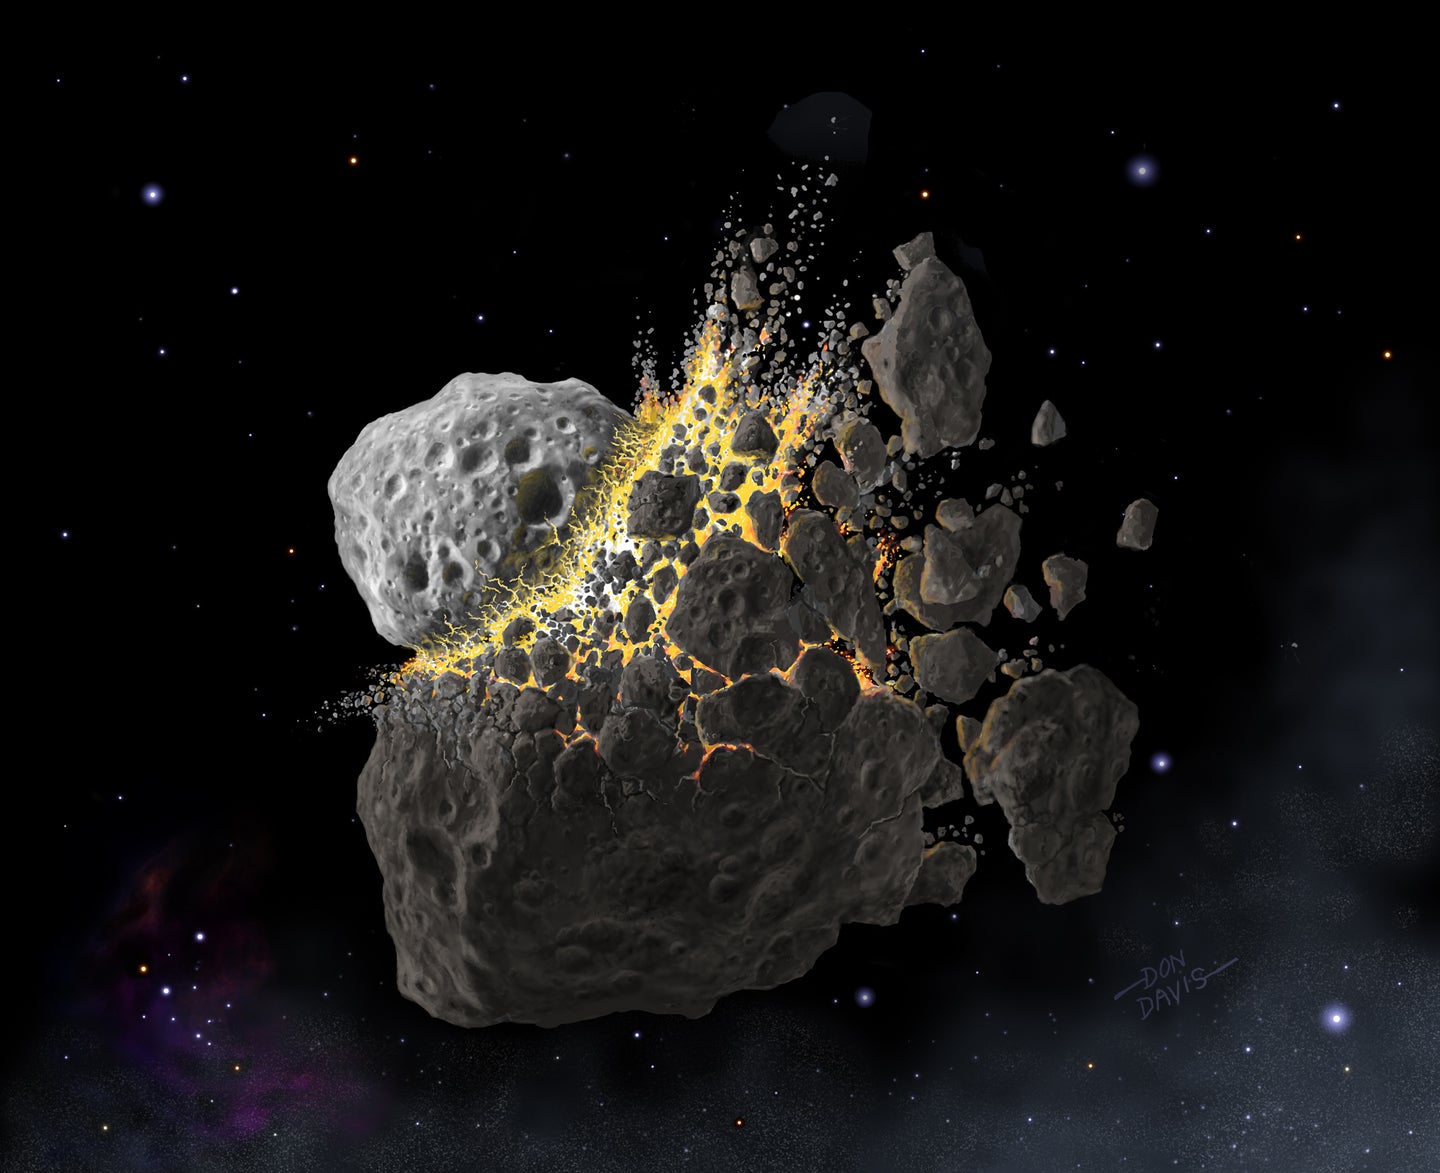 A space collision 466 million years ago gave rise to many of the meteorites falling today.